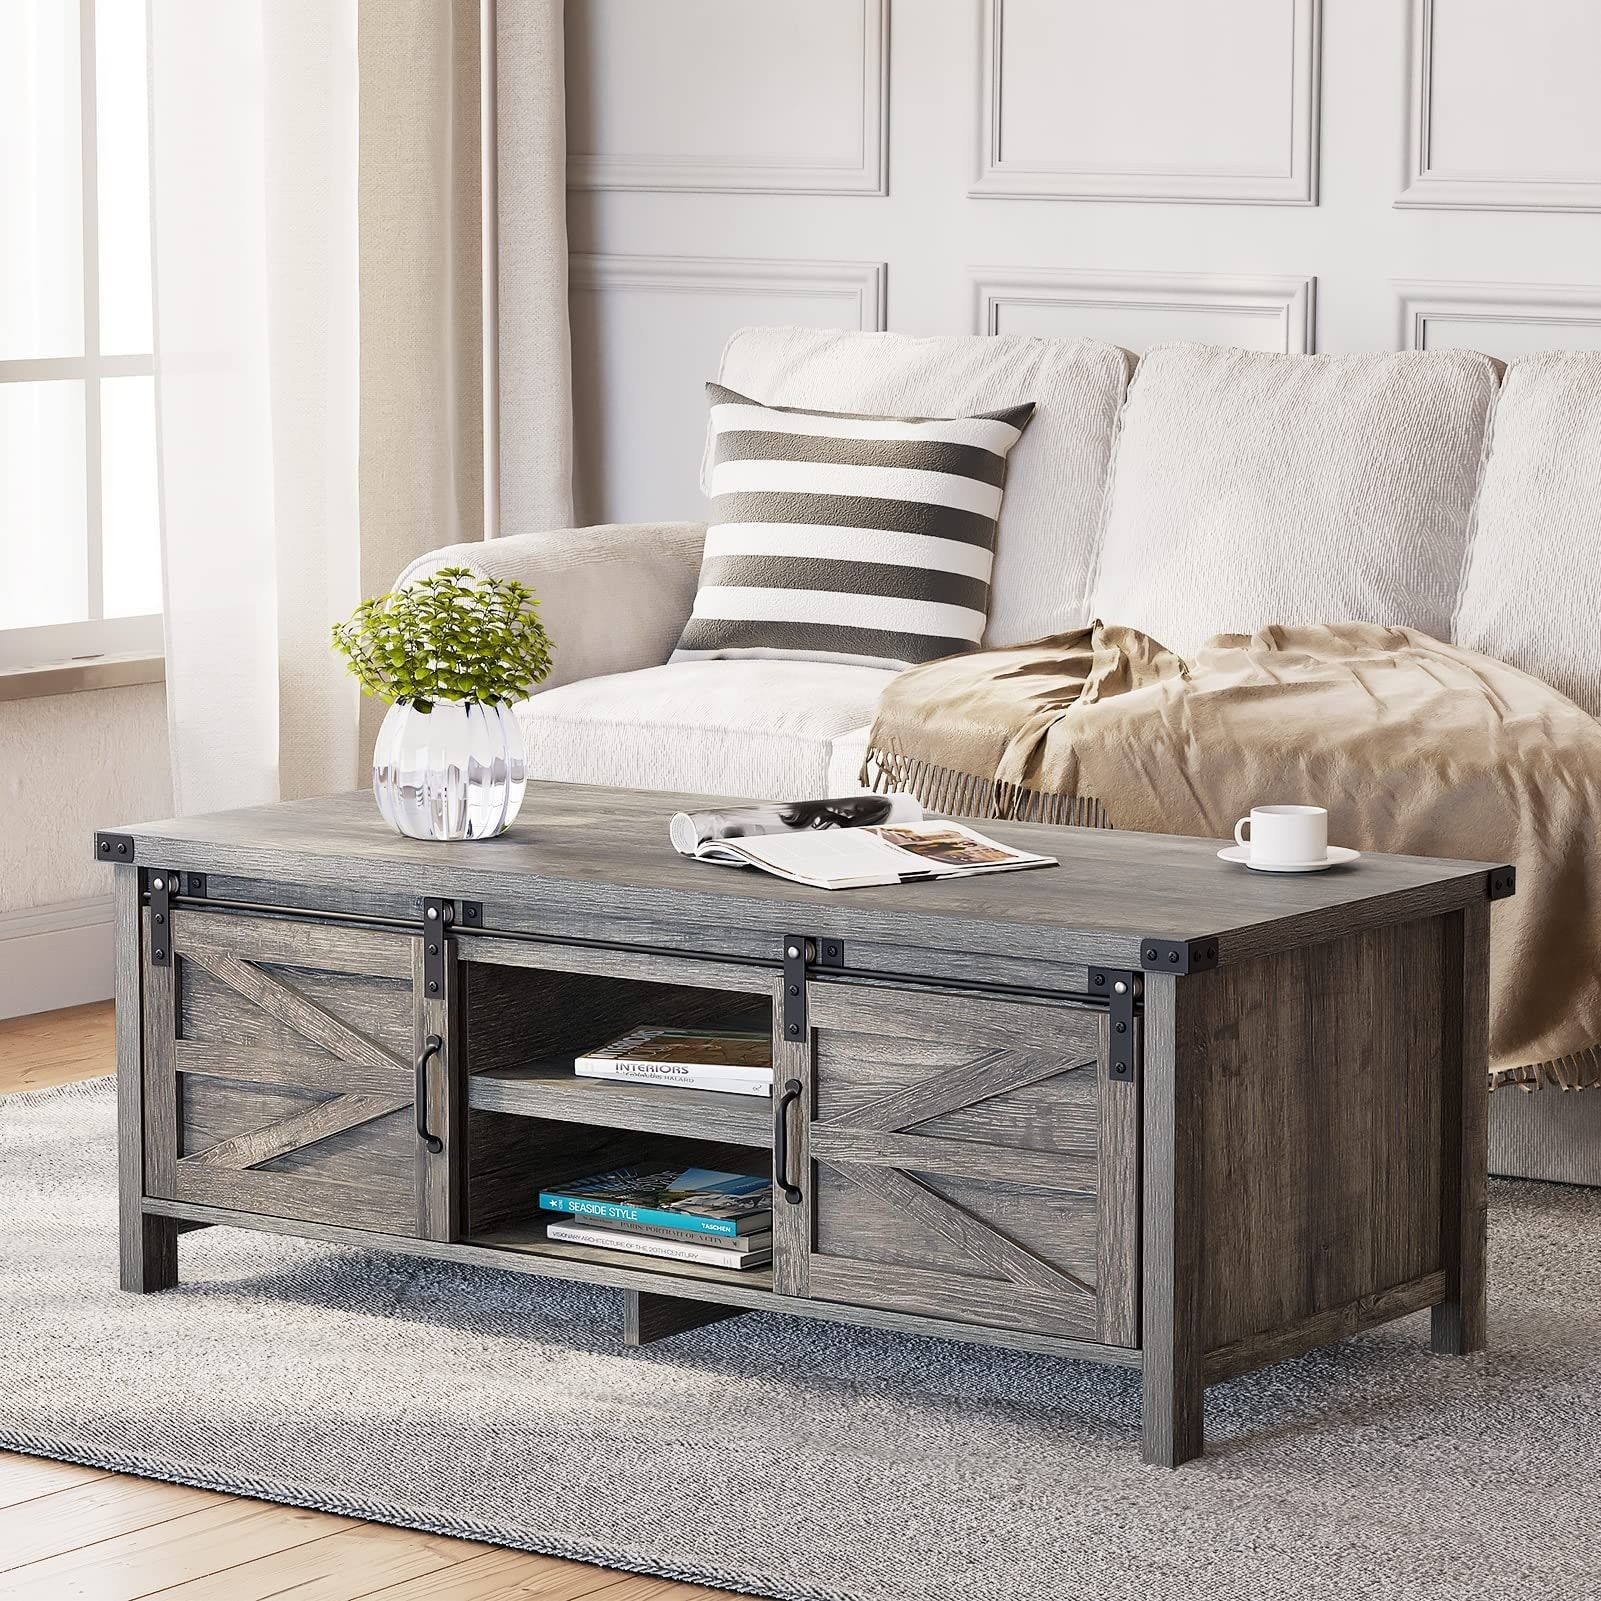 Farmhouse Coffee Table With Sliding Barn Doors & Storage, Grey Rustic  Wooden Center Rectangular Tables – Bed Bath & Beyond – 37841722 Within Coffee Tables With Storage And Barn Doors (Photo 2 of 15)